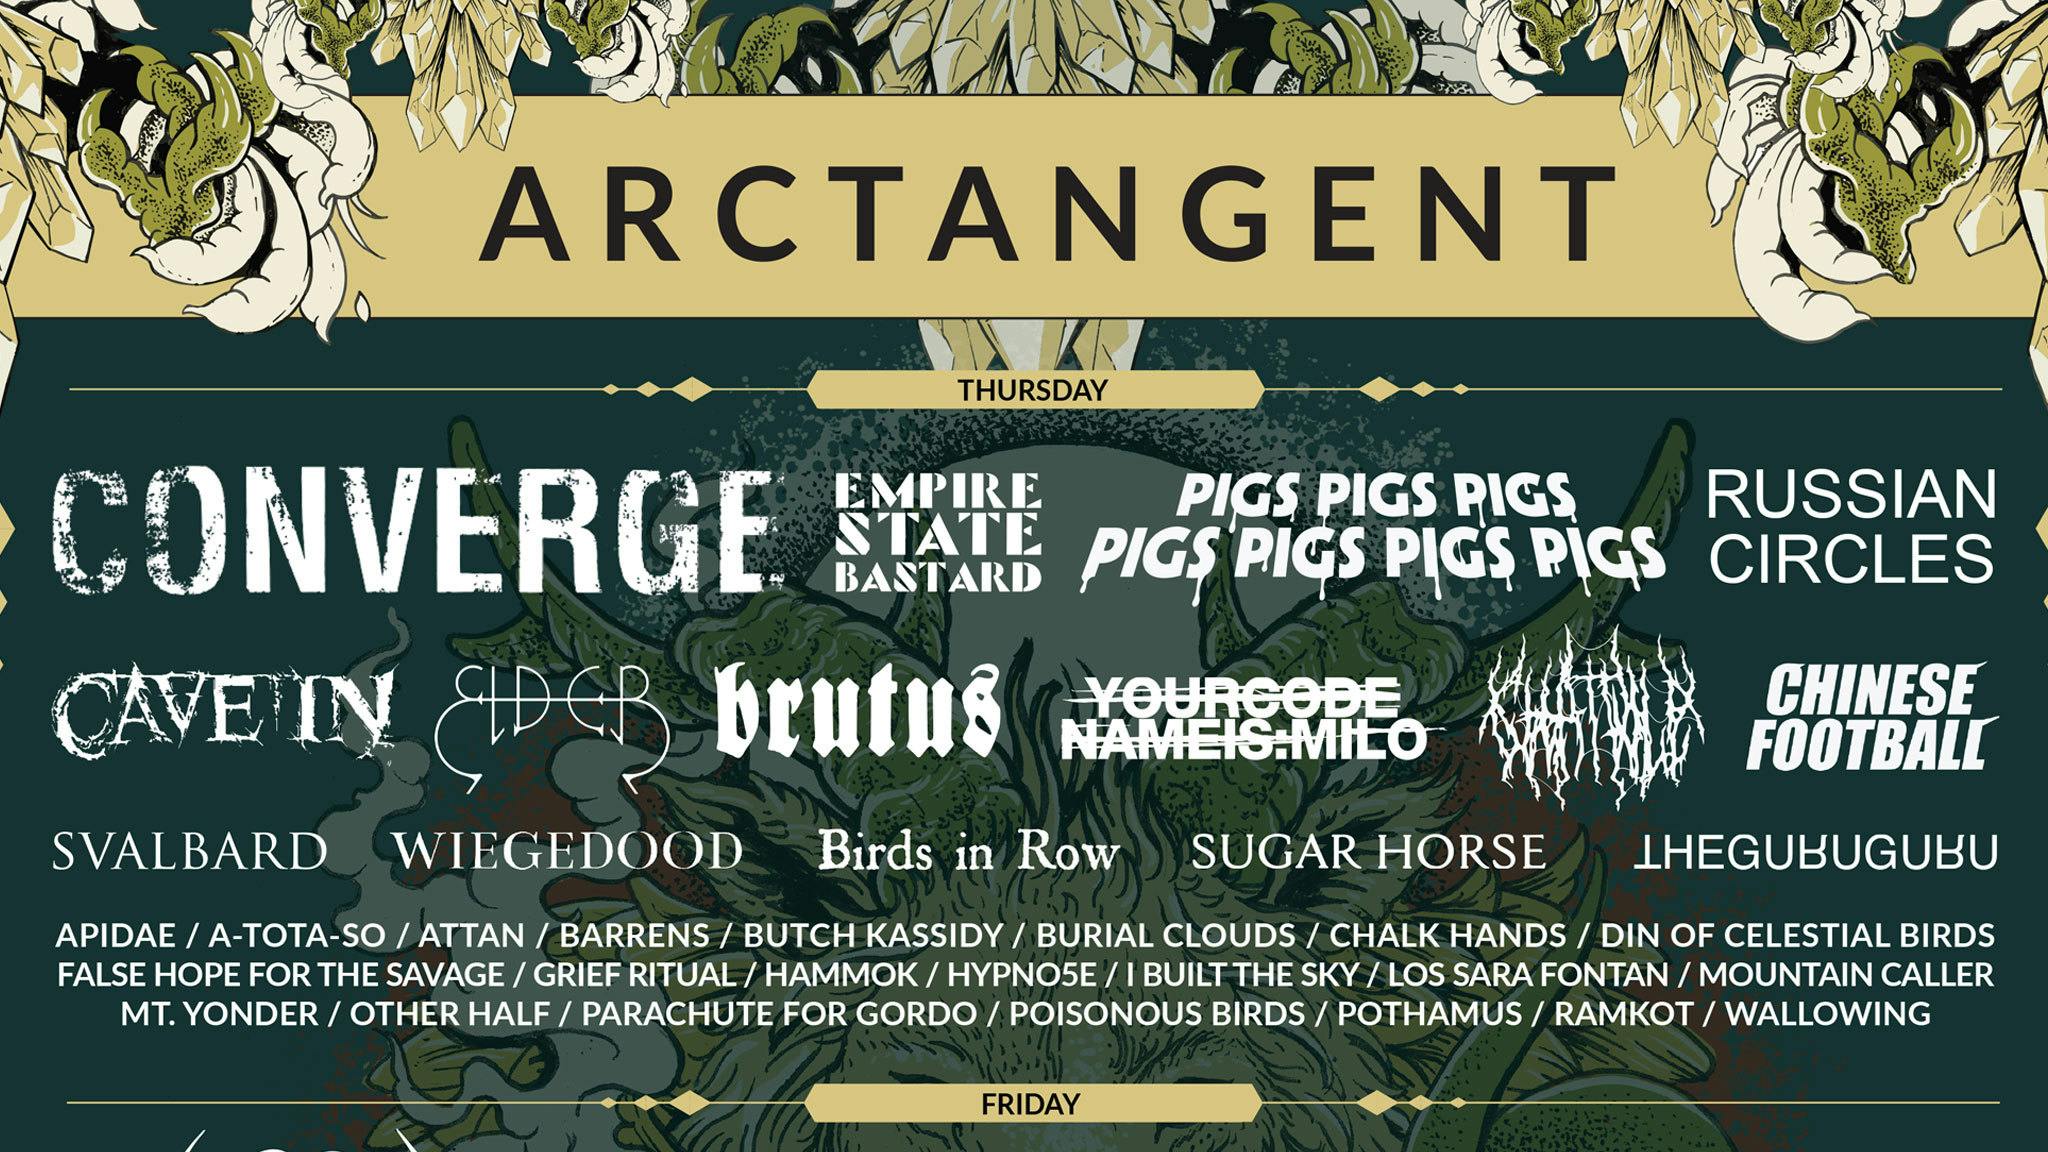 ArcTanGent announce final main stage headliner, plus more bands